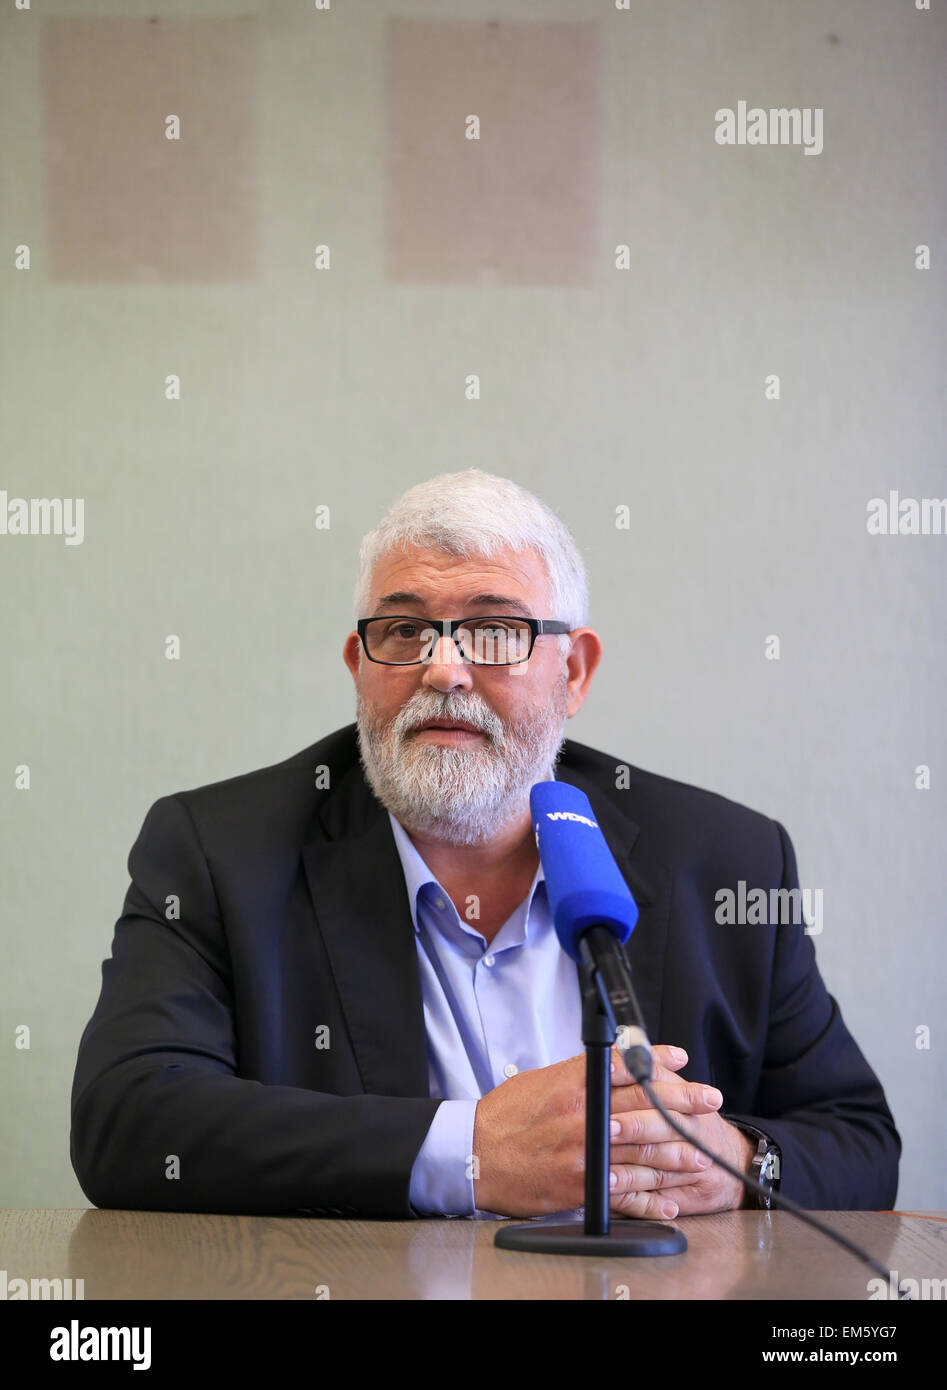 Marti Pujol Kasals, Mayor of Llinars del Vallesm speaking at a press conference in Haltern am See, Germany, 16 April 2015. Before the memorial ceremony for plane crash victims, the mayor is meeting guests from the spanish twin town in Haltern. 16 pupils and 2 teahers from the German school were returning from an exchange trip near Barcelona on the Germanwings plane that crashed on 24 March. PHOTO: MARCEL KUSCH/dpa Stock Photo